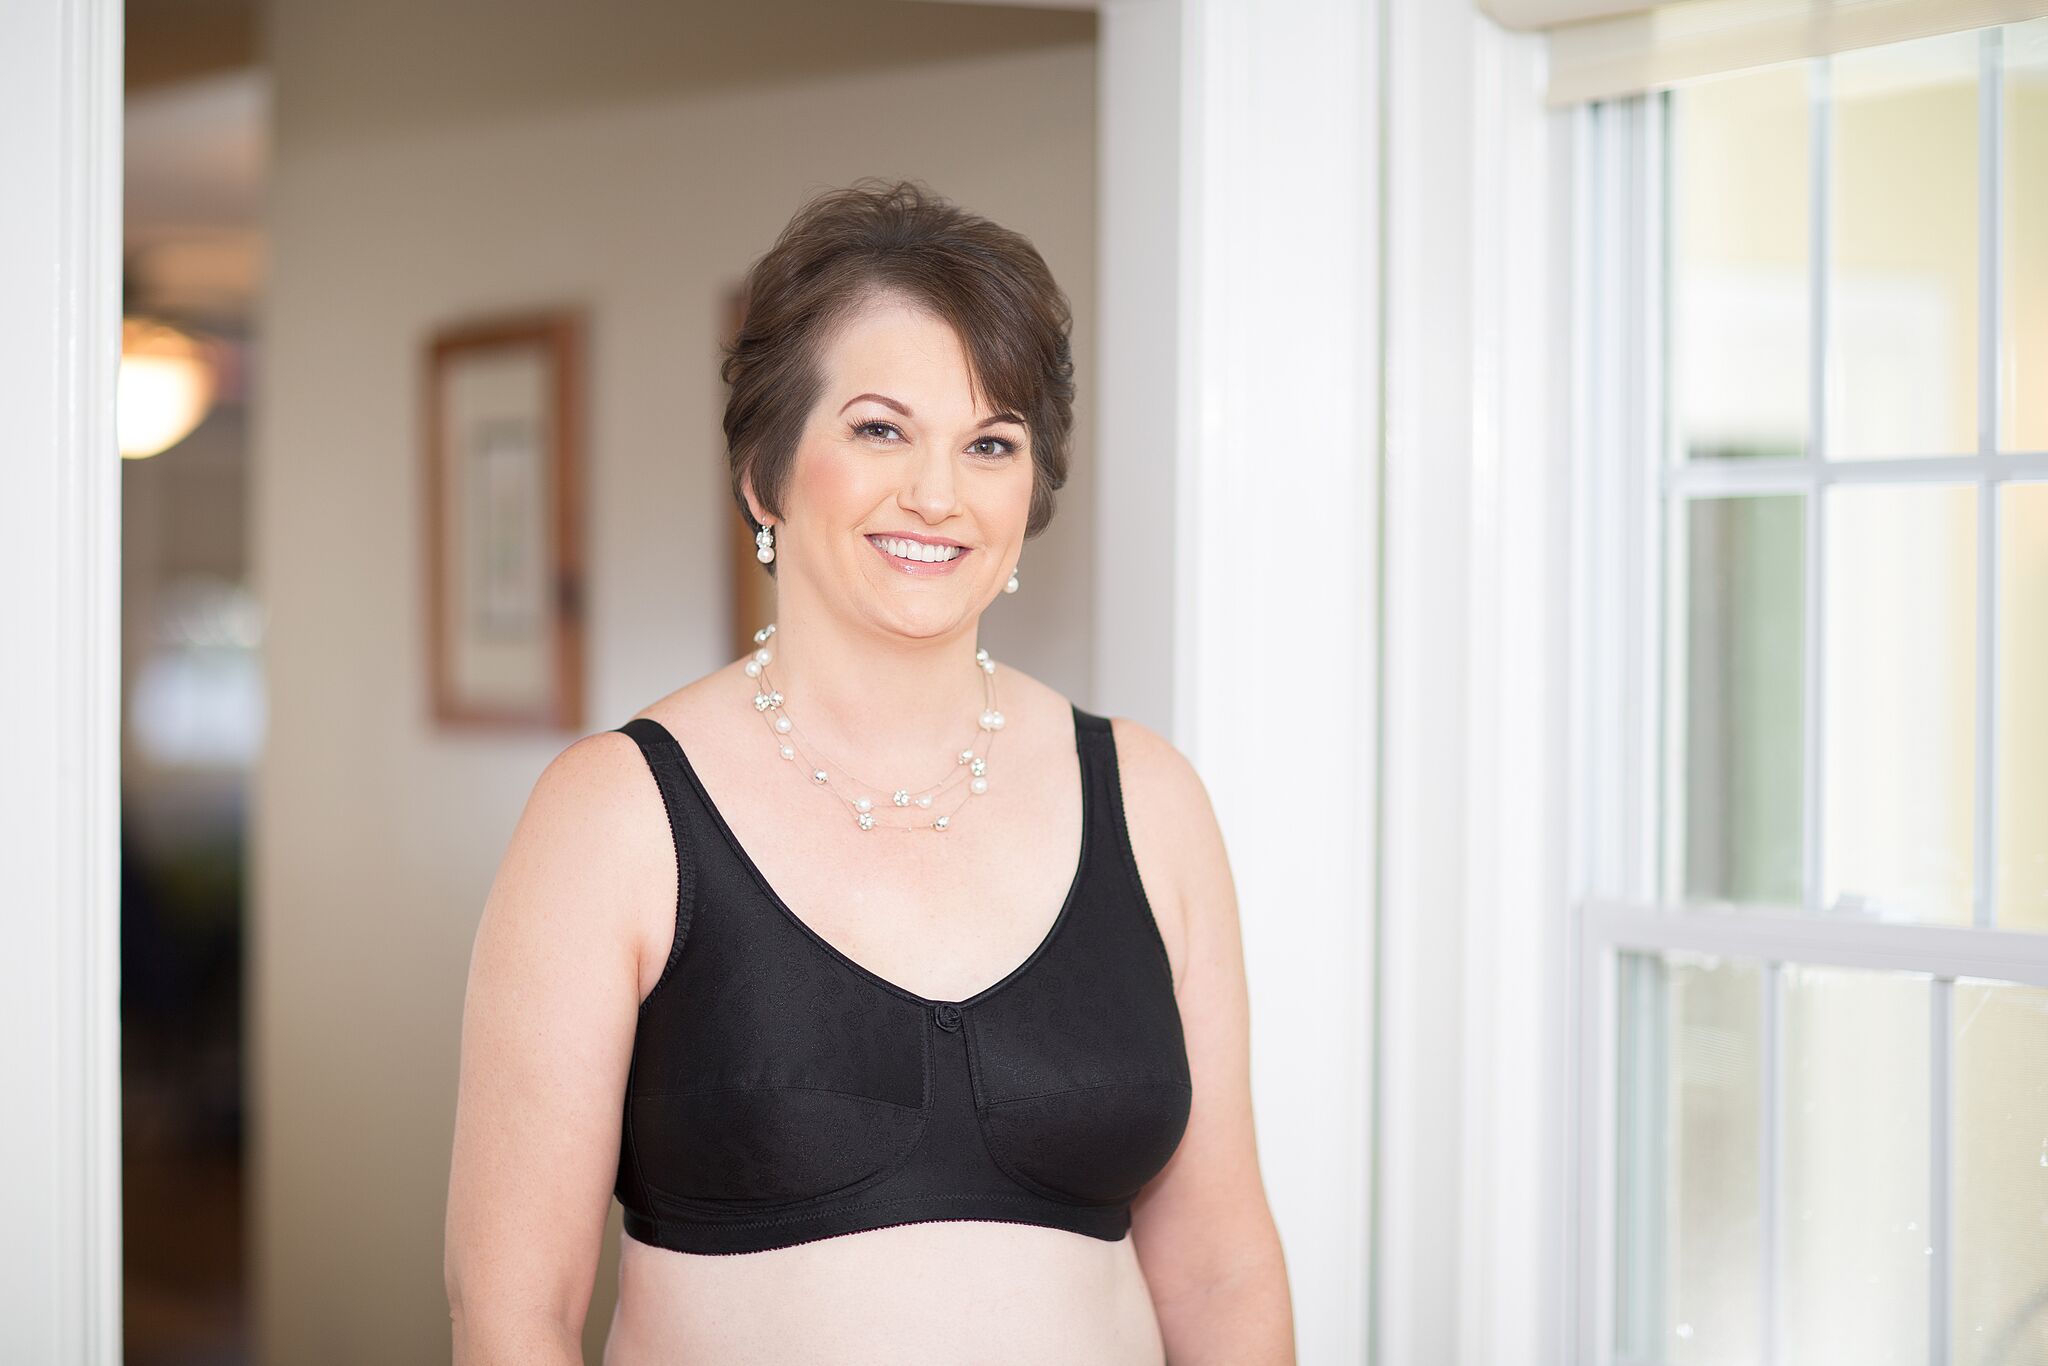 ABC Royal Lace Full Cup Mastectomy Bra Style 509